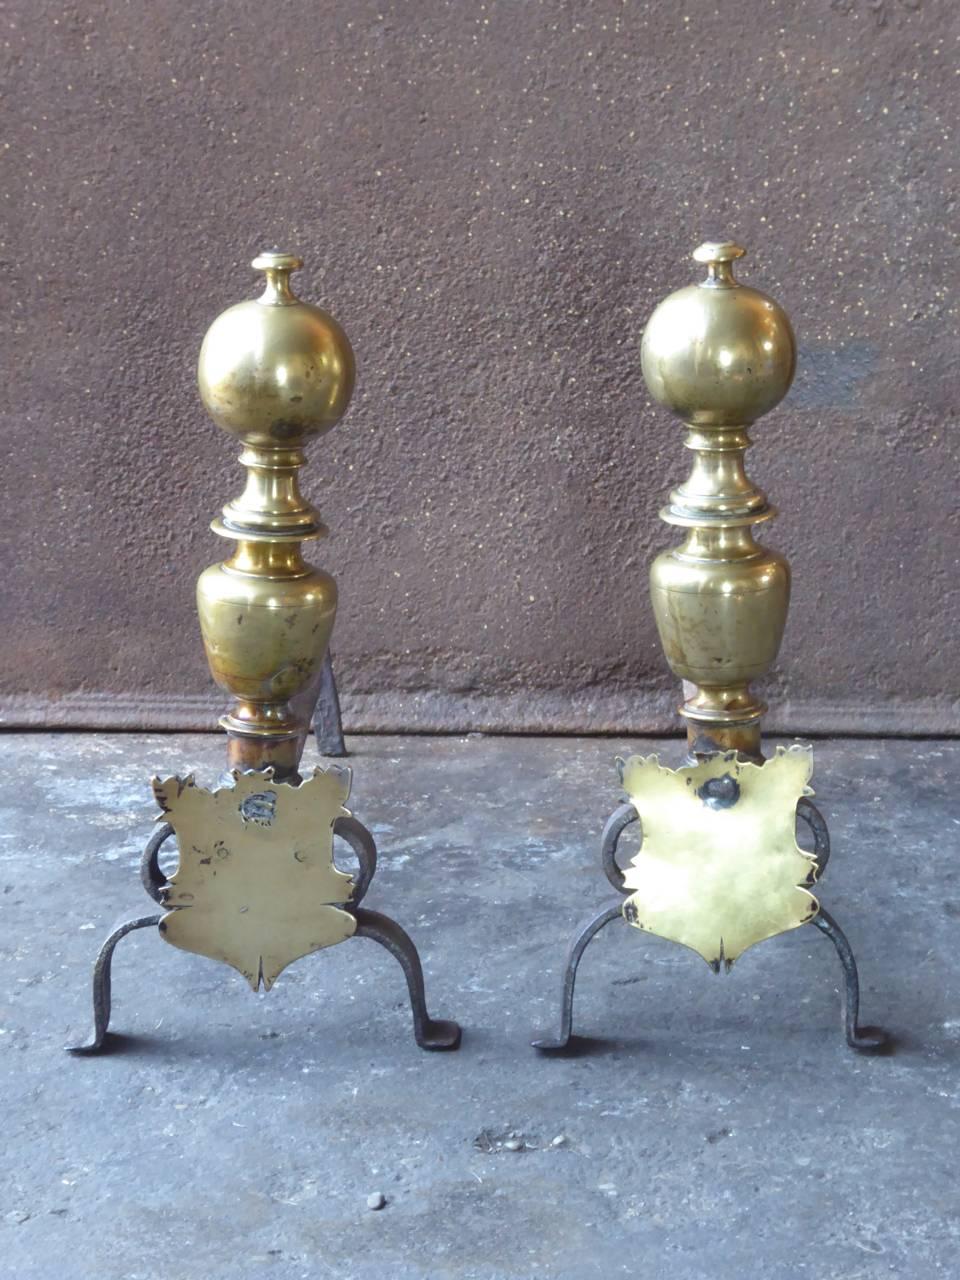 17th century Spanish Louis XIII andirons made of wrought iron, brass and bronze.

We have a unique and specialized collection of antique and used fireplace accessories consisting of more than 1000 listings at 1stdibs. Amongst others, we always have